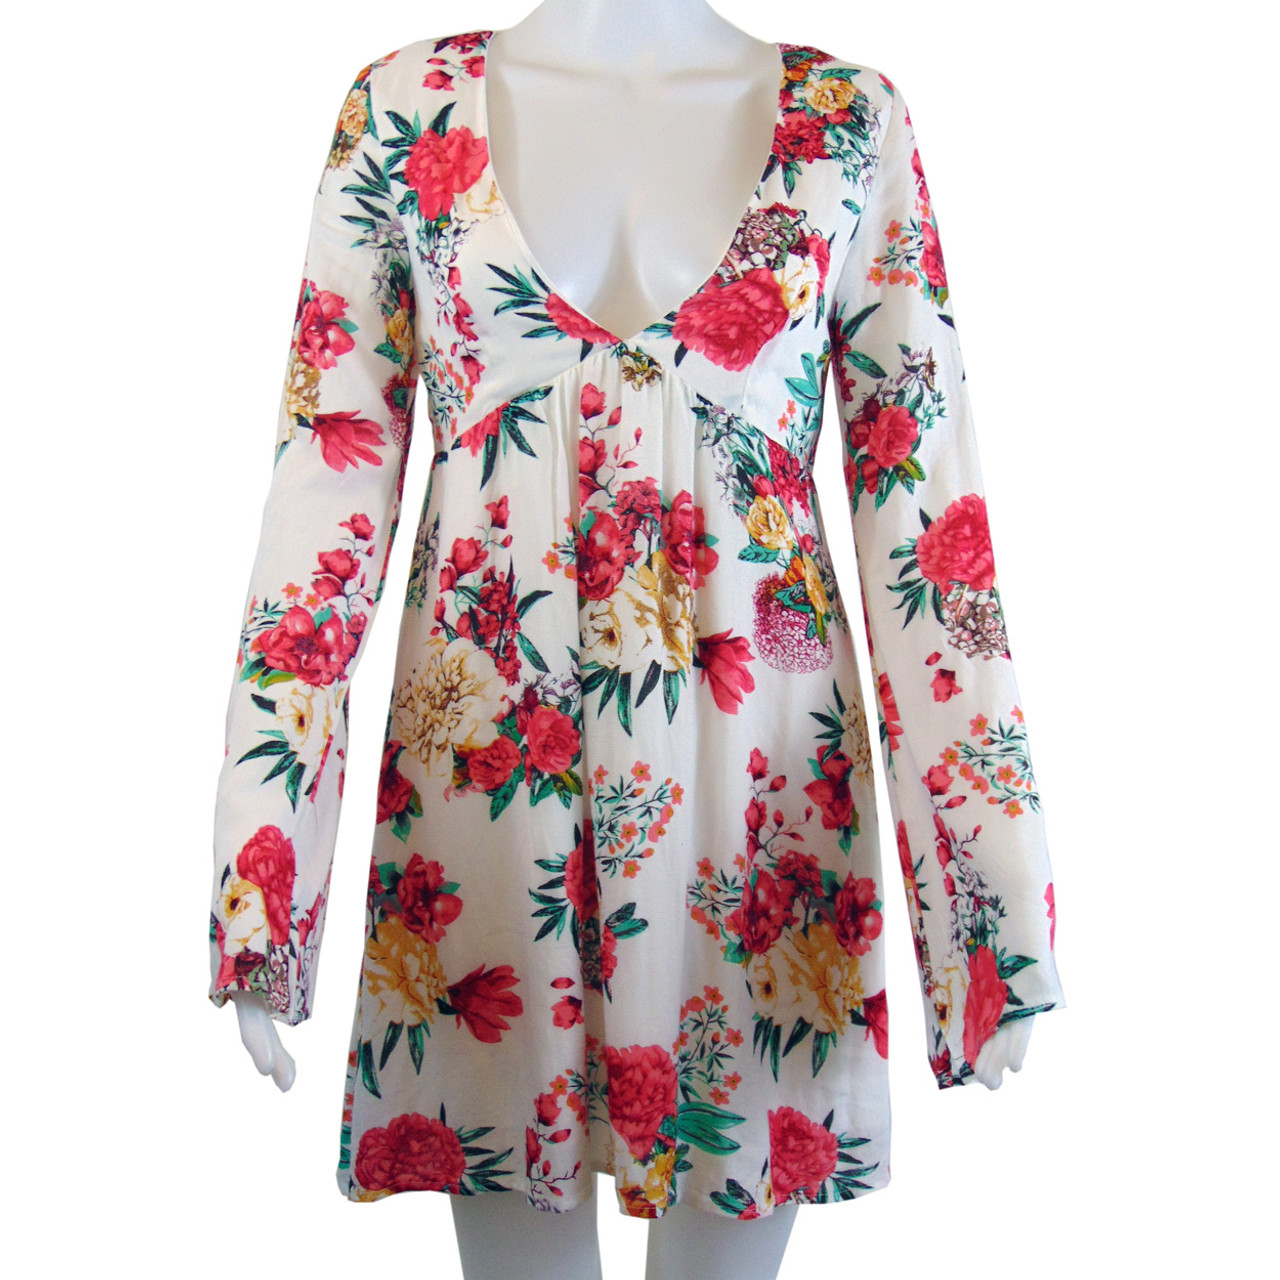 Floral Open Back Mini Dress - Size S (NWT)